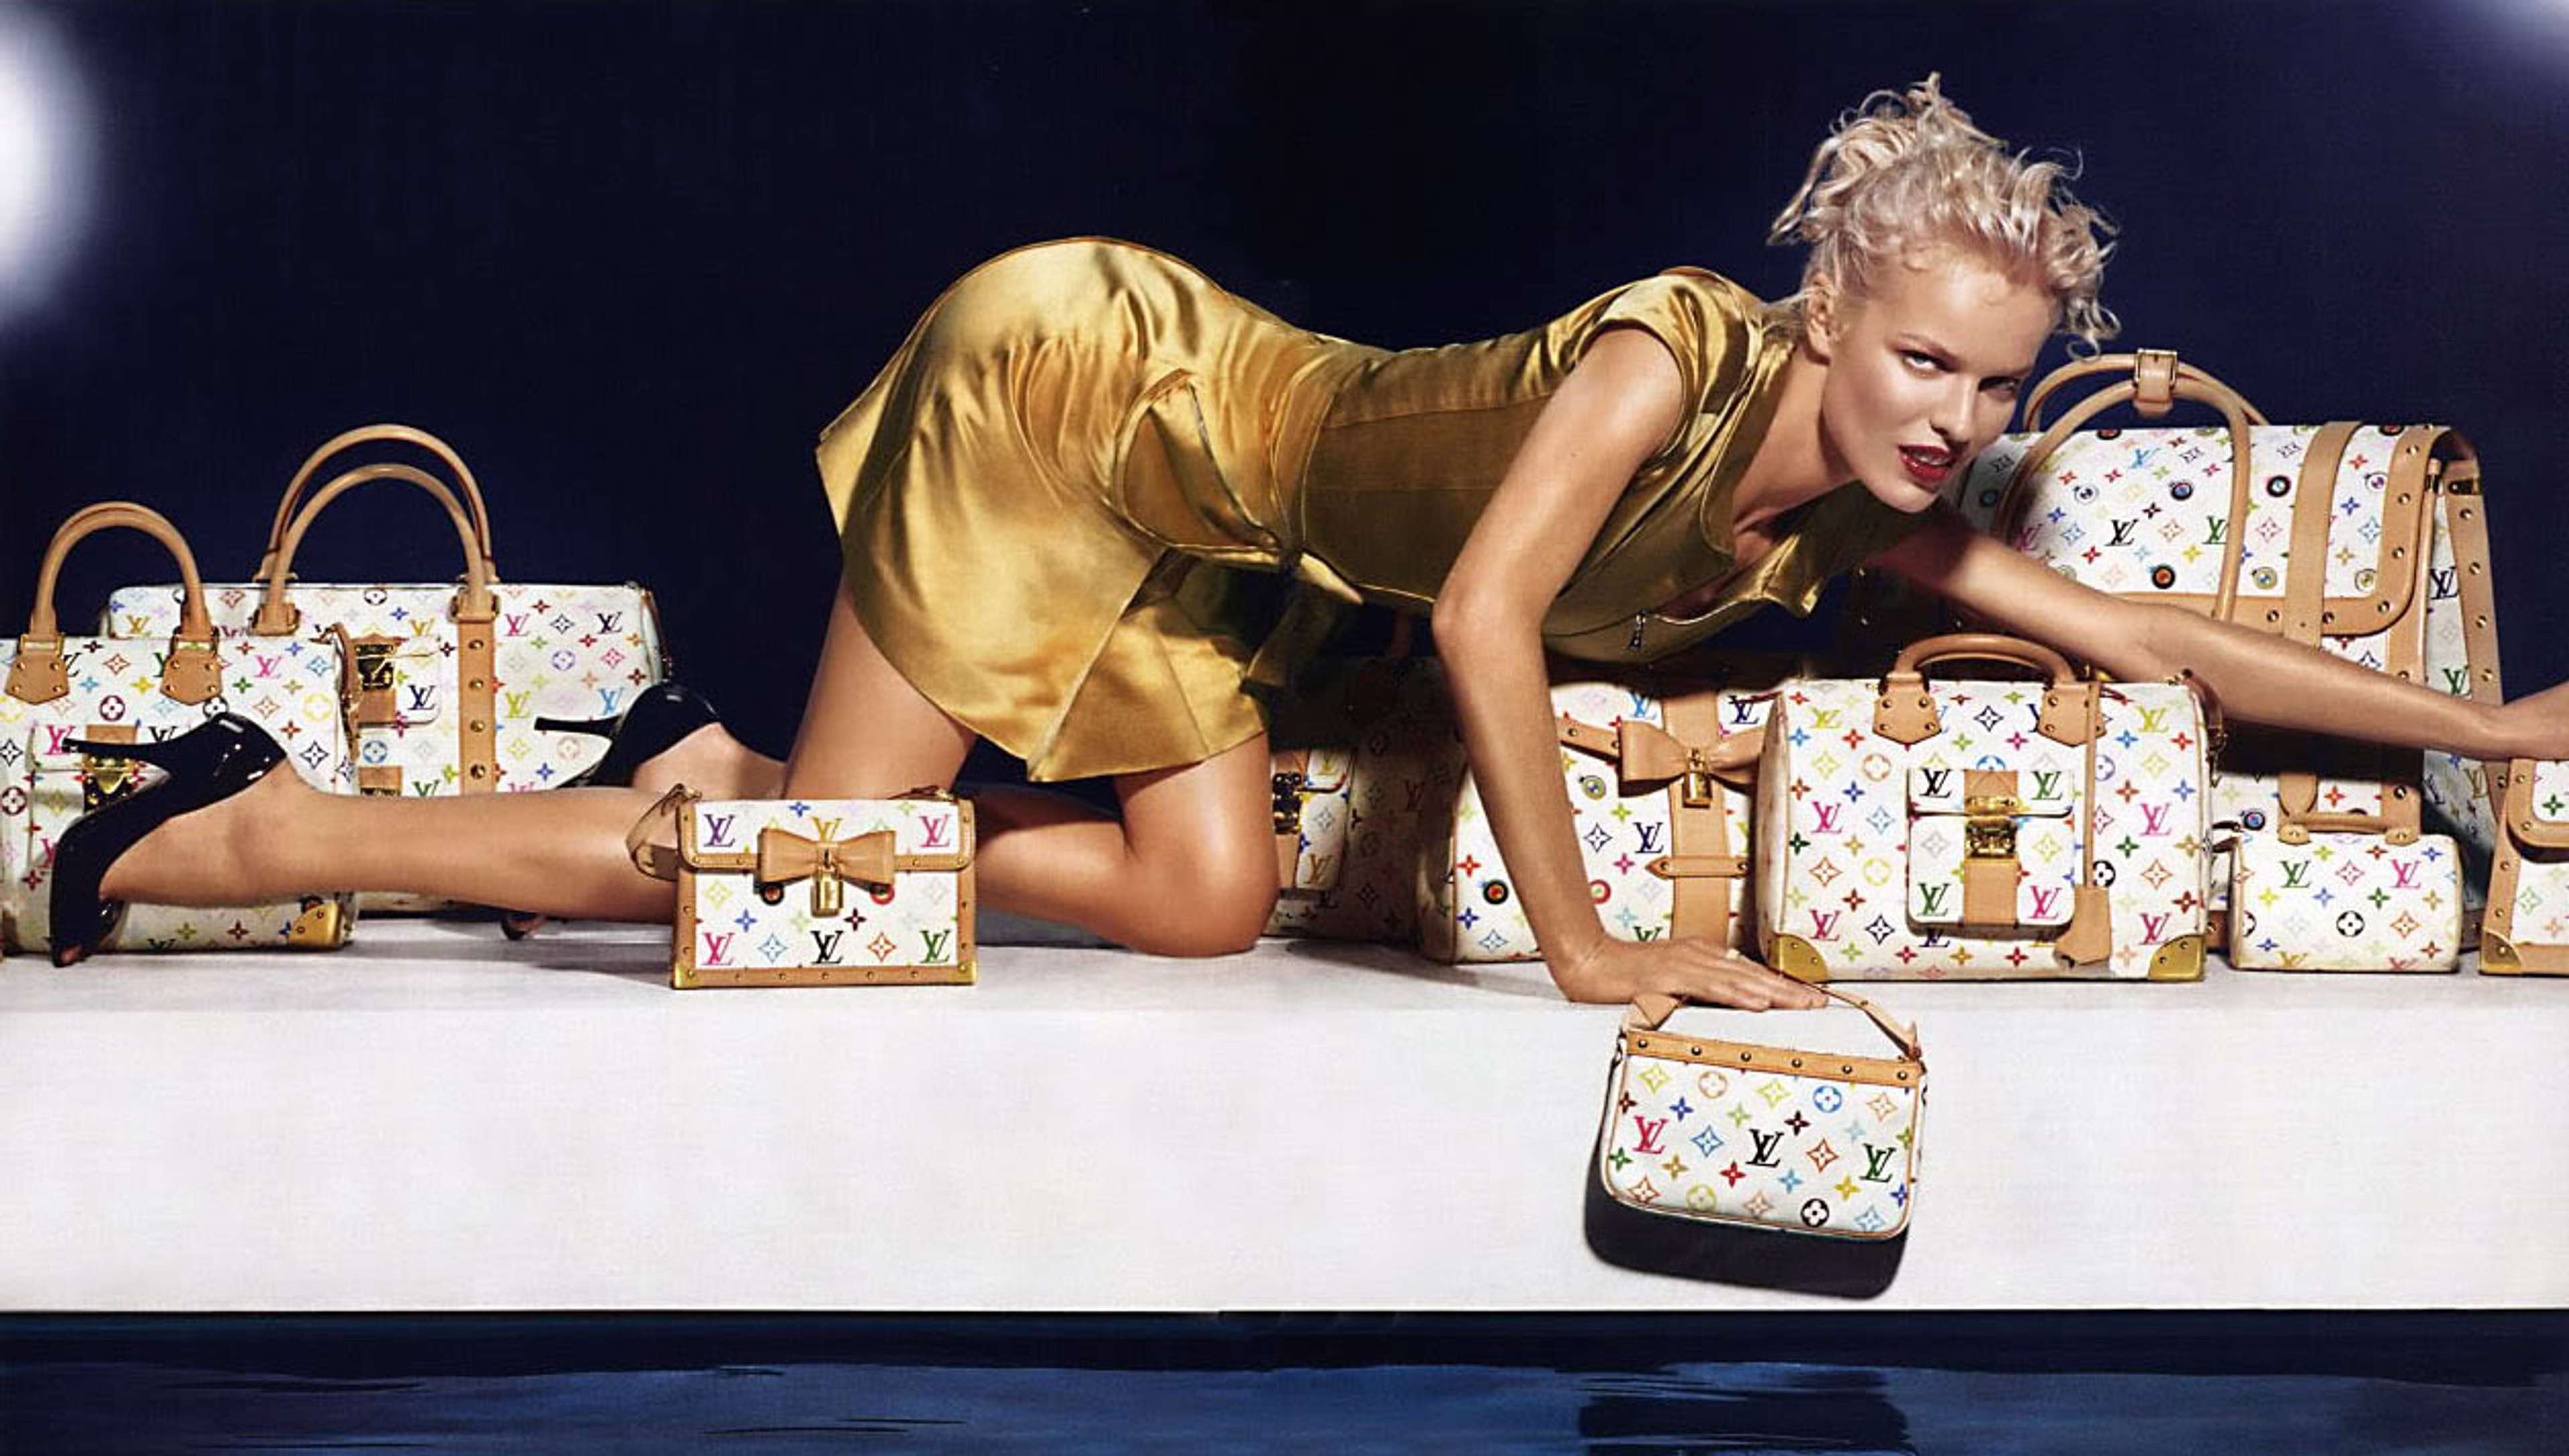 An image of a model crouching over a large number of Louis Vuitton bags and luggage, reimagined in Murakami’s colourful palette.